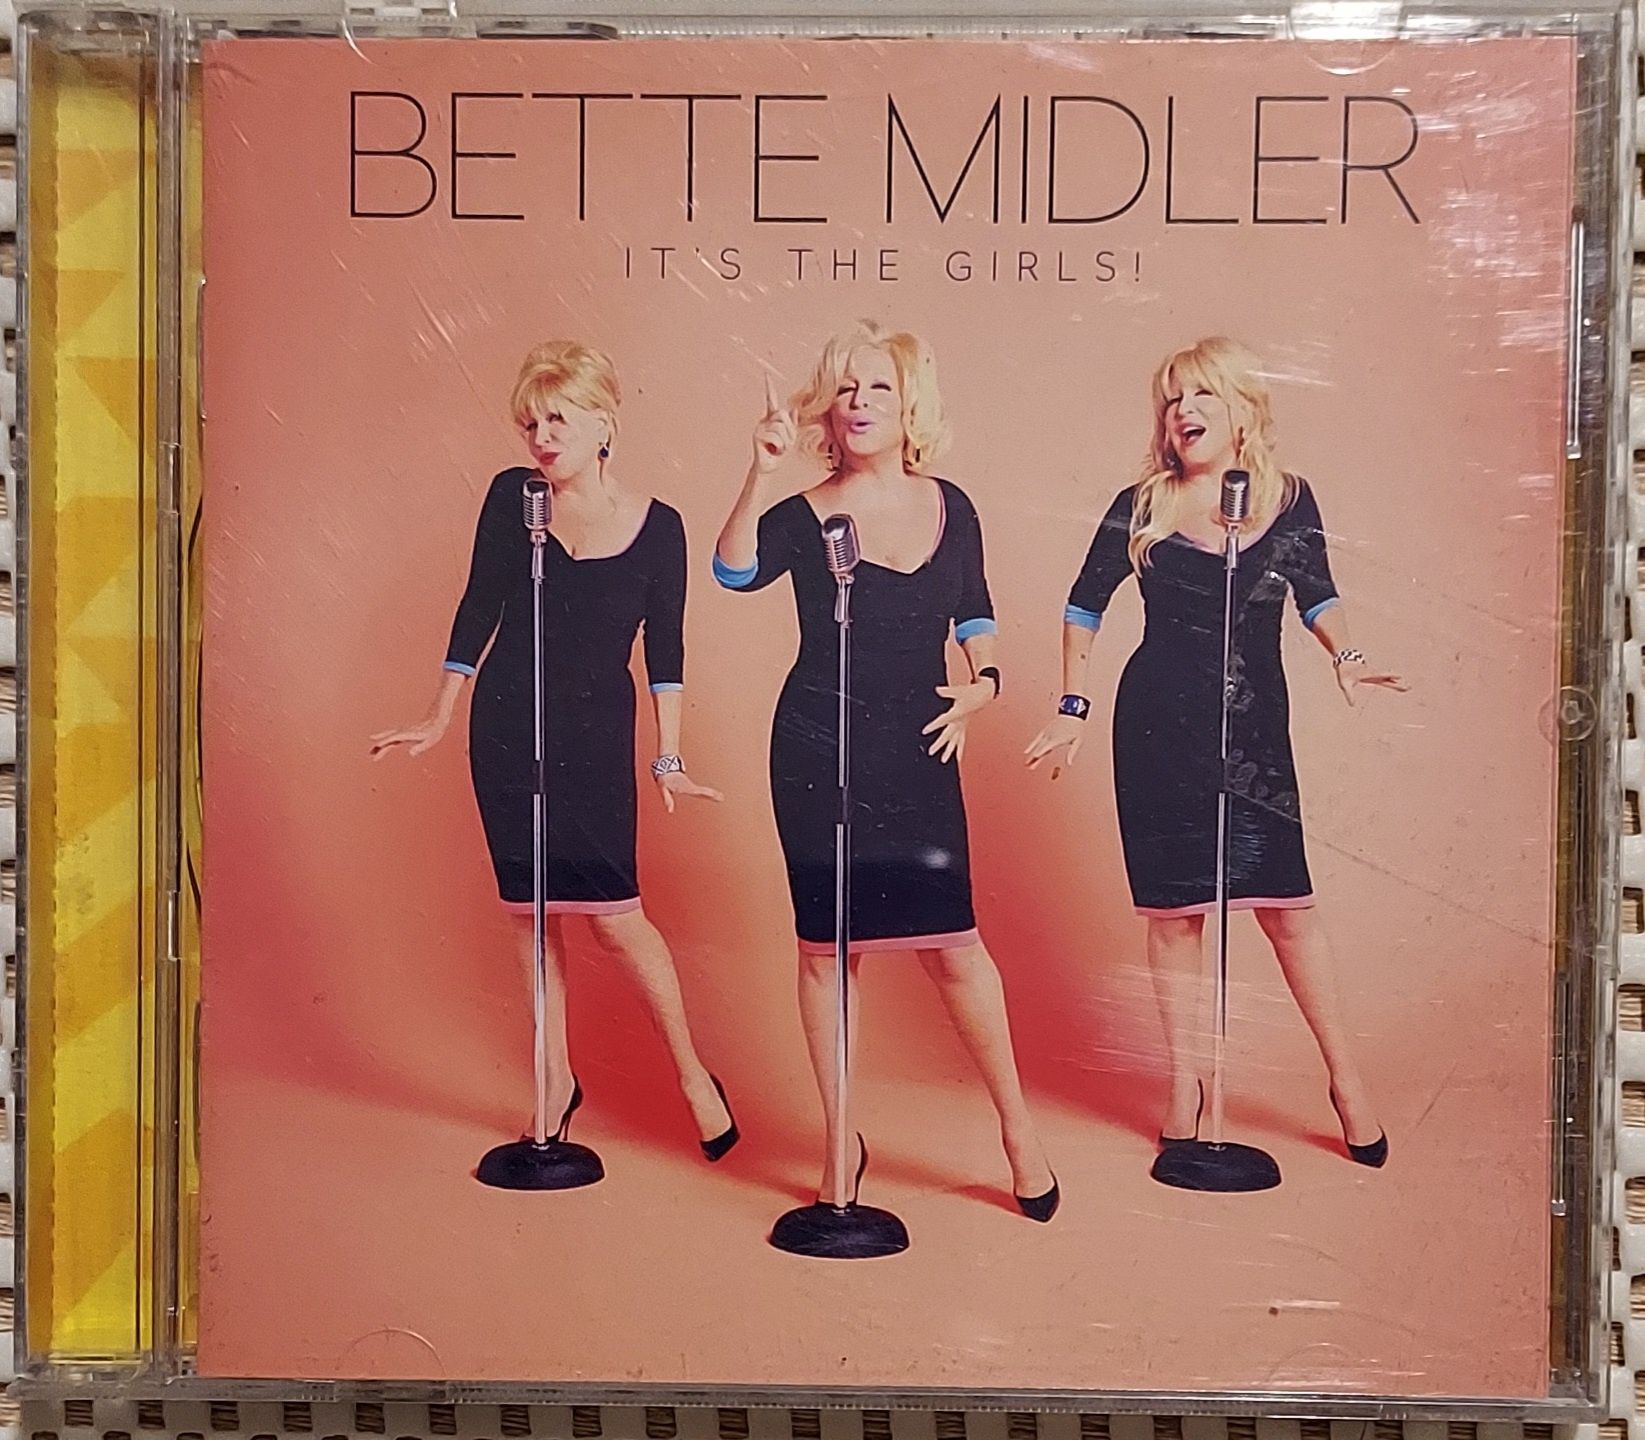 Płyty CD  - Bette Midler, Winifred Atwell i inni